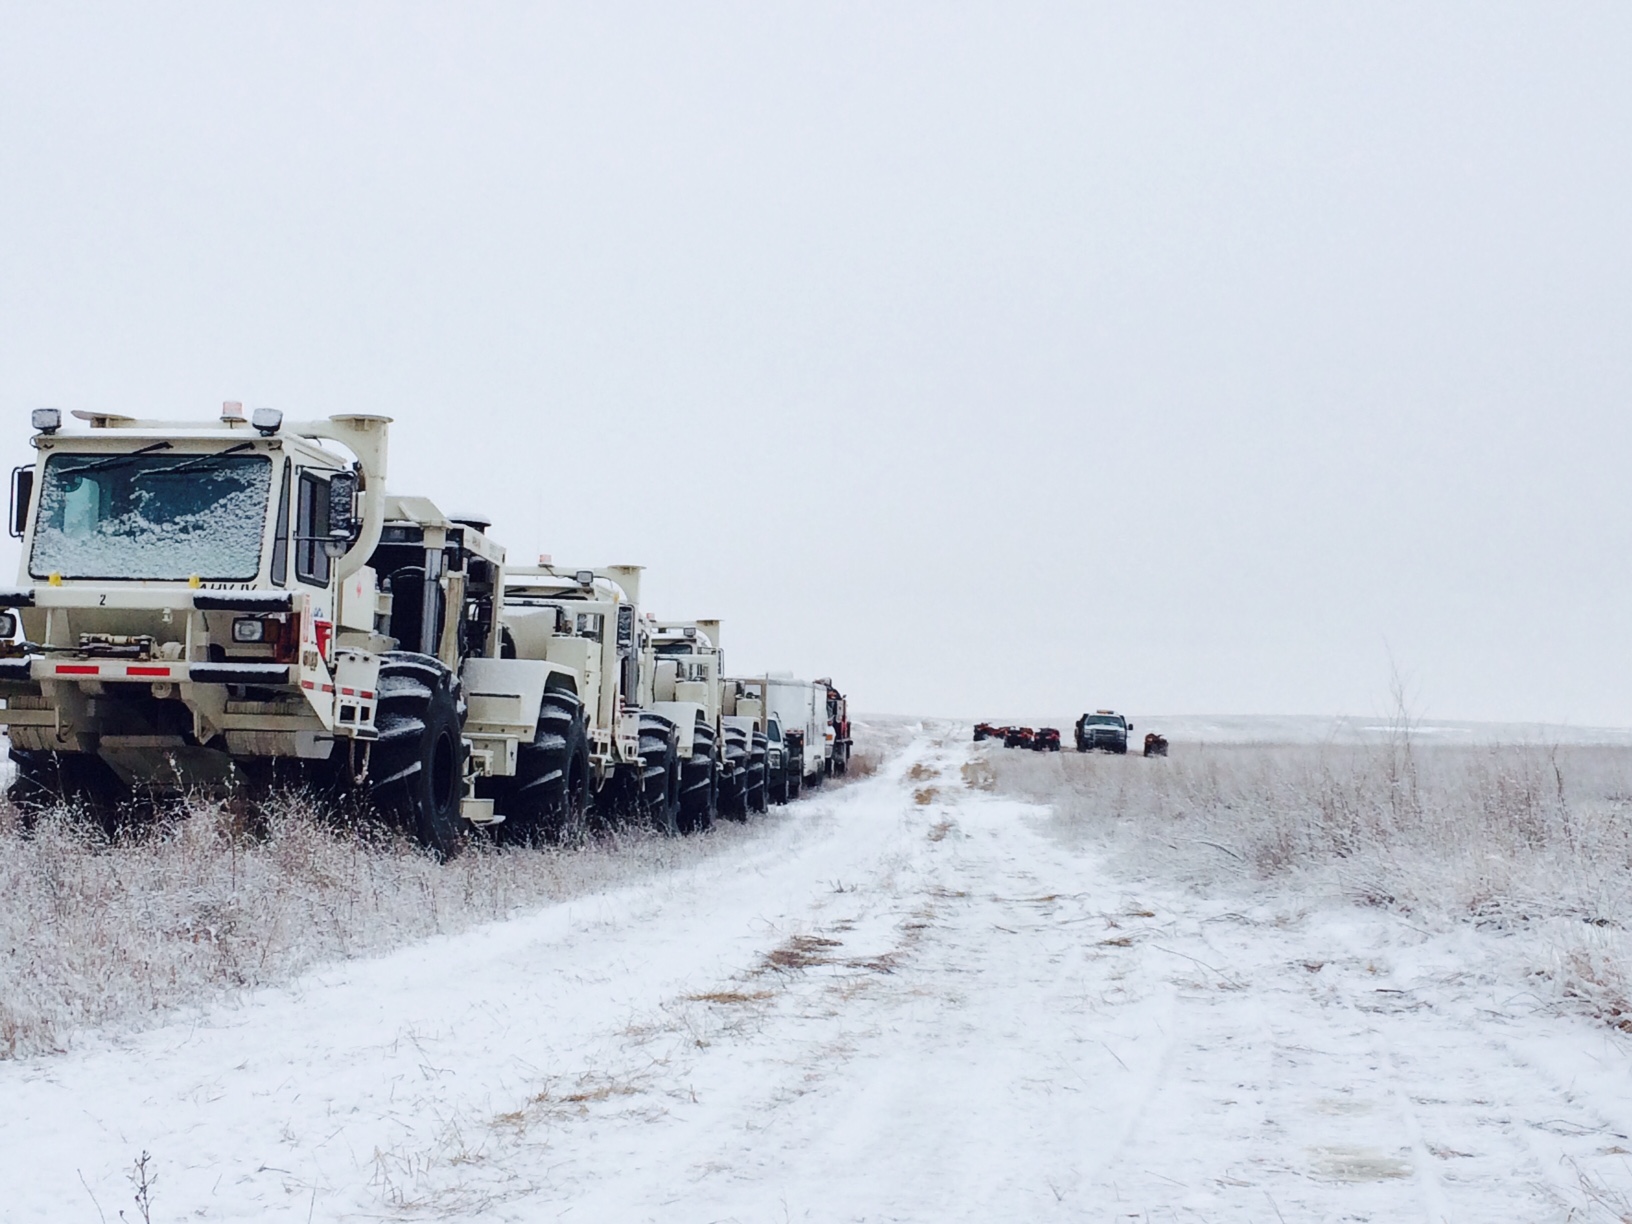 Vibroseis trucks lined up to provide seismic sources at Aquistore